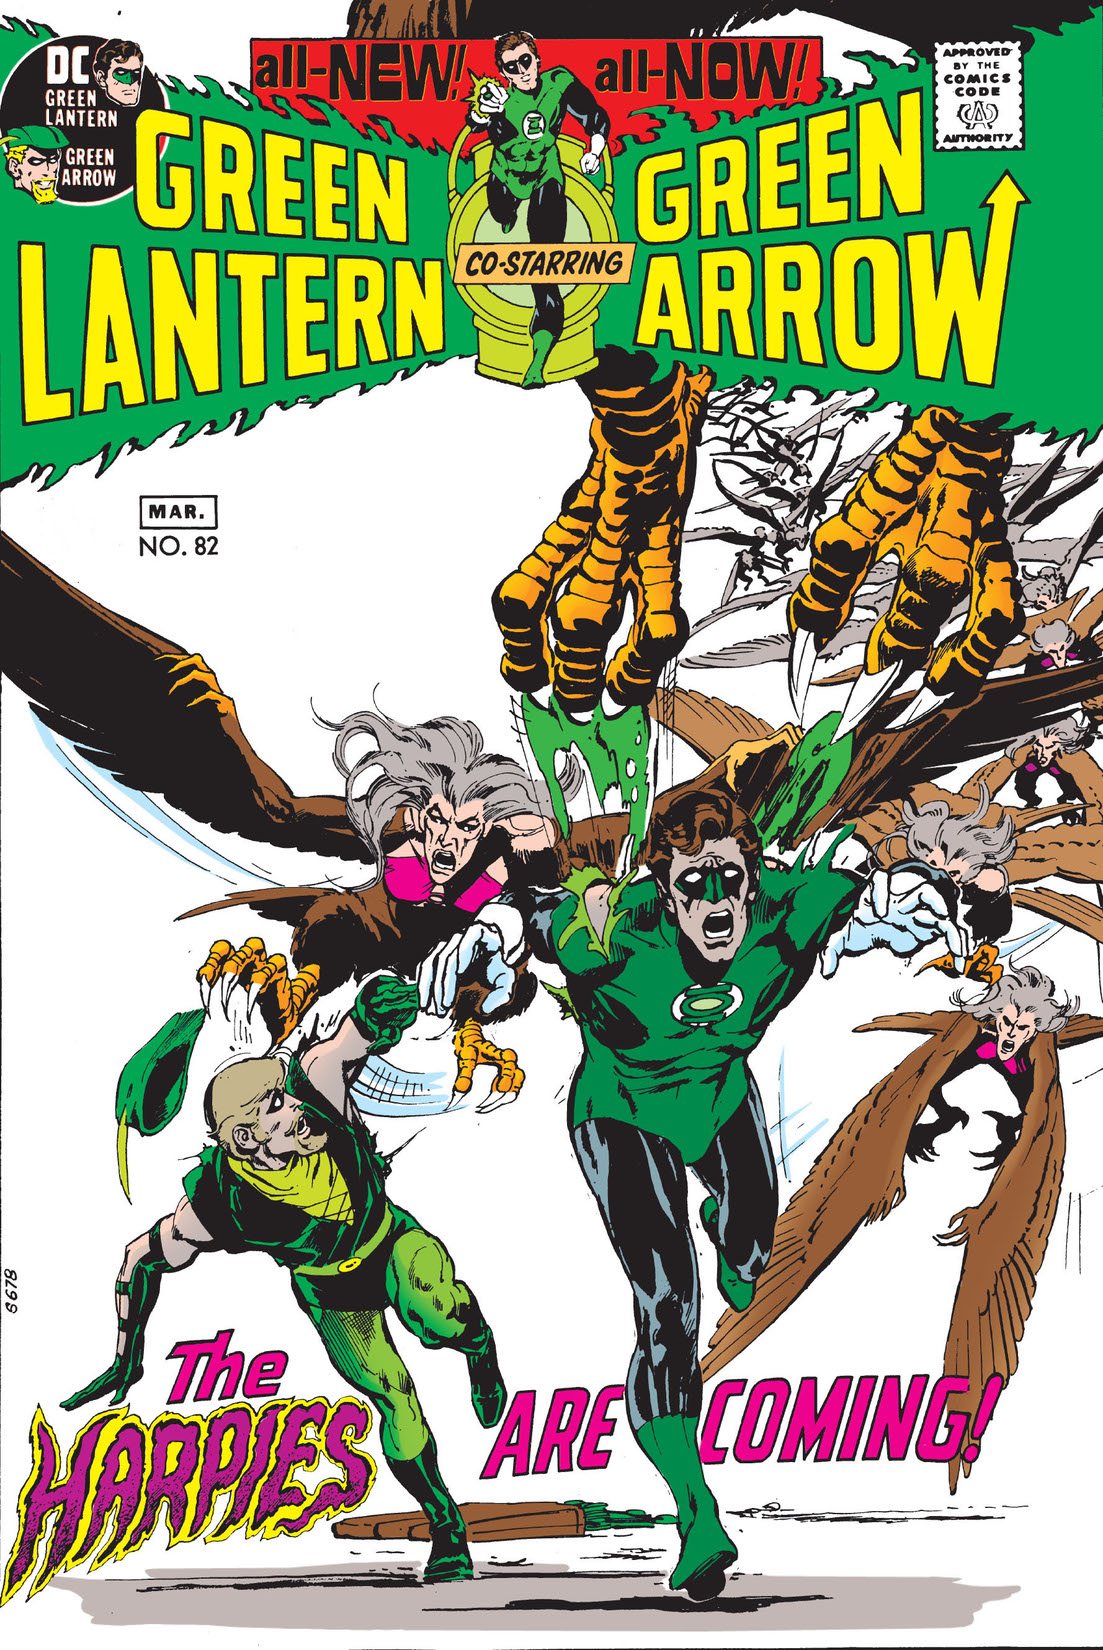 Green Lantern (1960-) #82 preview images